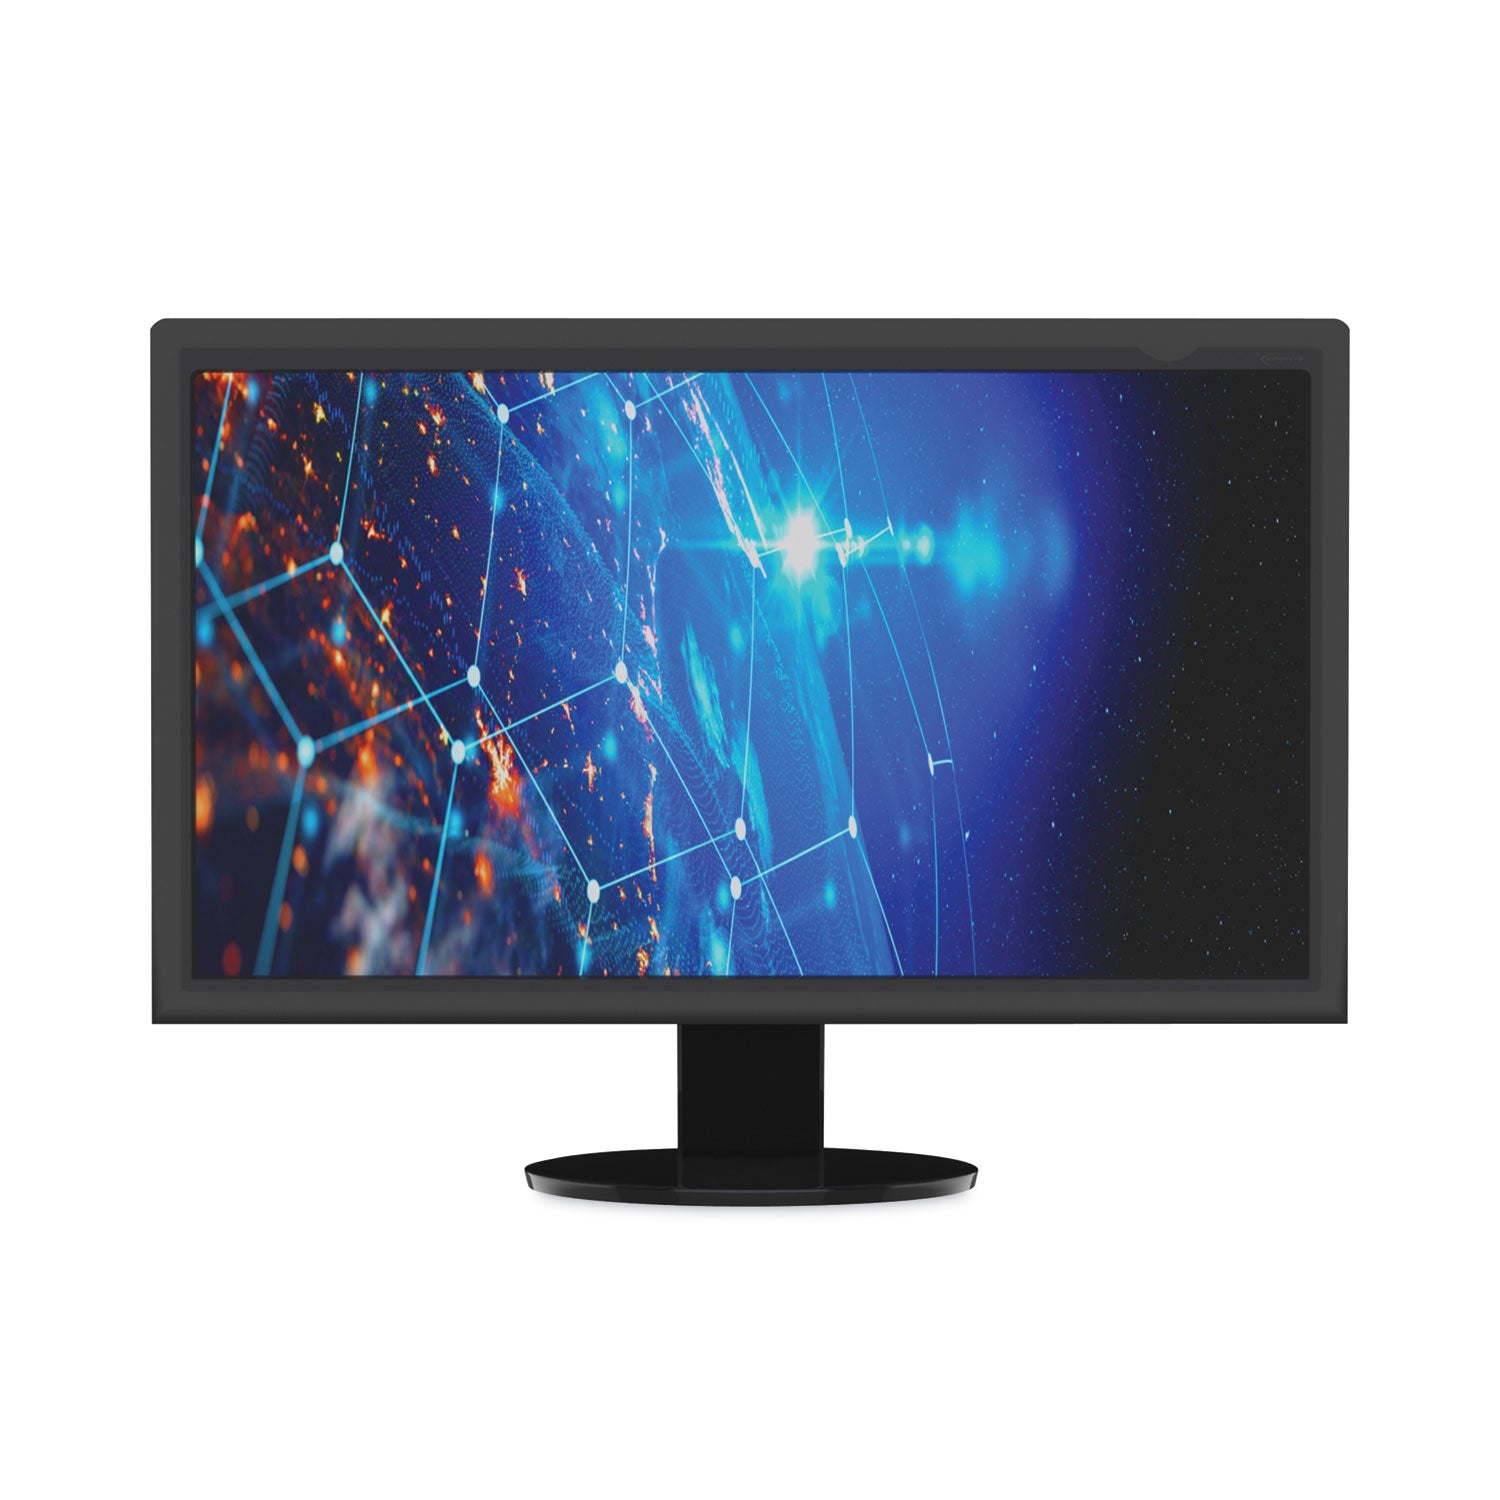 blackout-privacy-monitor-filter-for-238-widescreen-flat-panel-monitor-169-aspect-ratio_ivrblf238w - 4